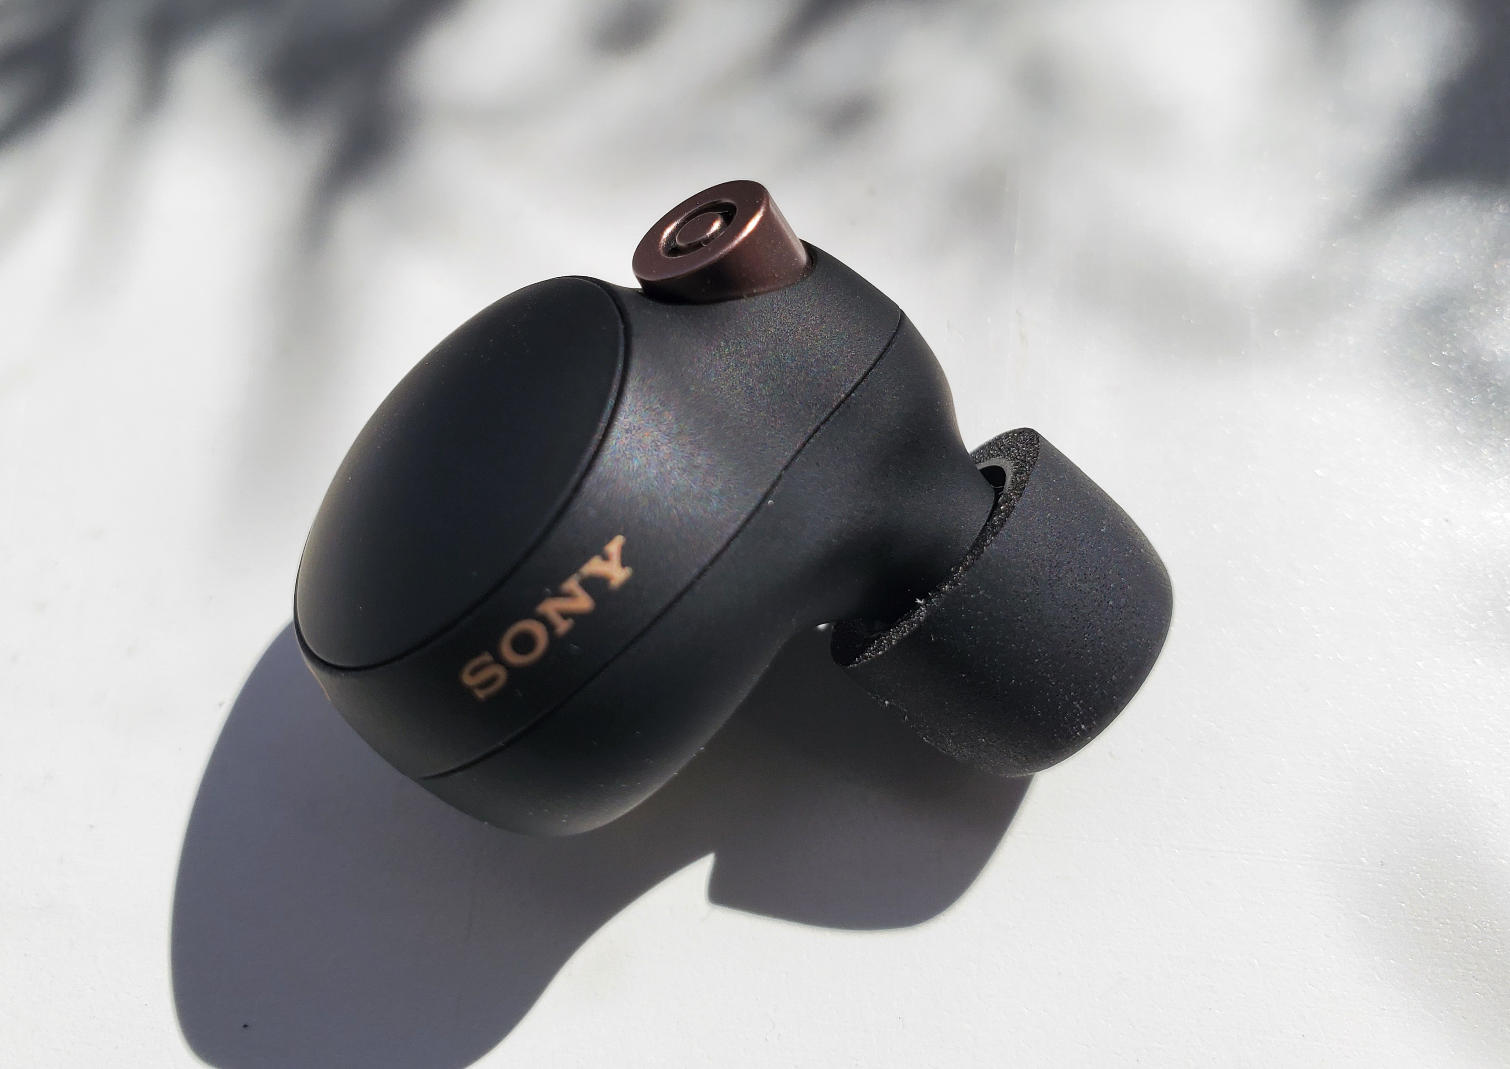 Sony WF-1000XM4 earbuds review: Superb noise cancellation, clear